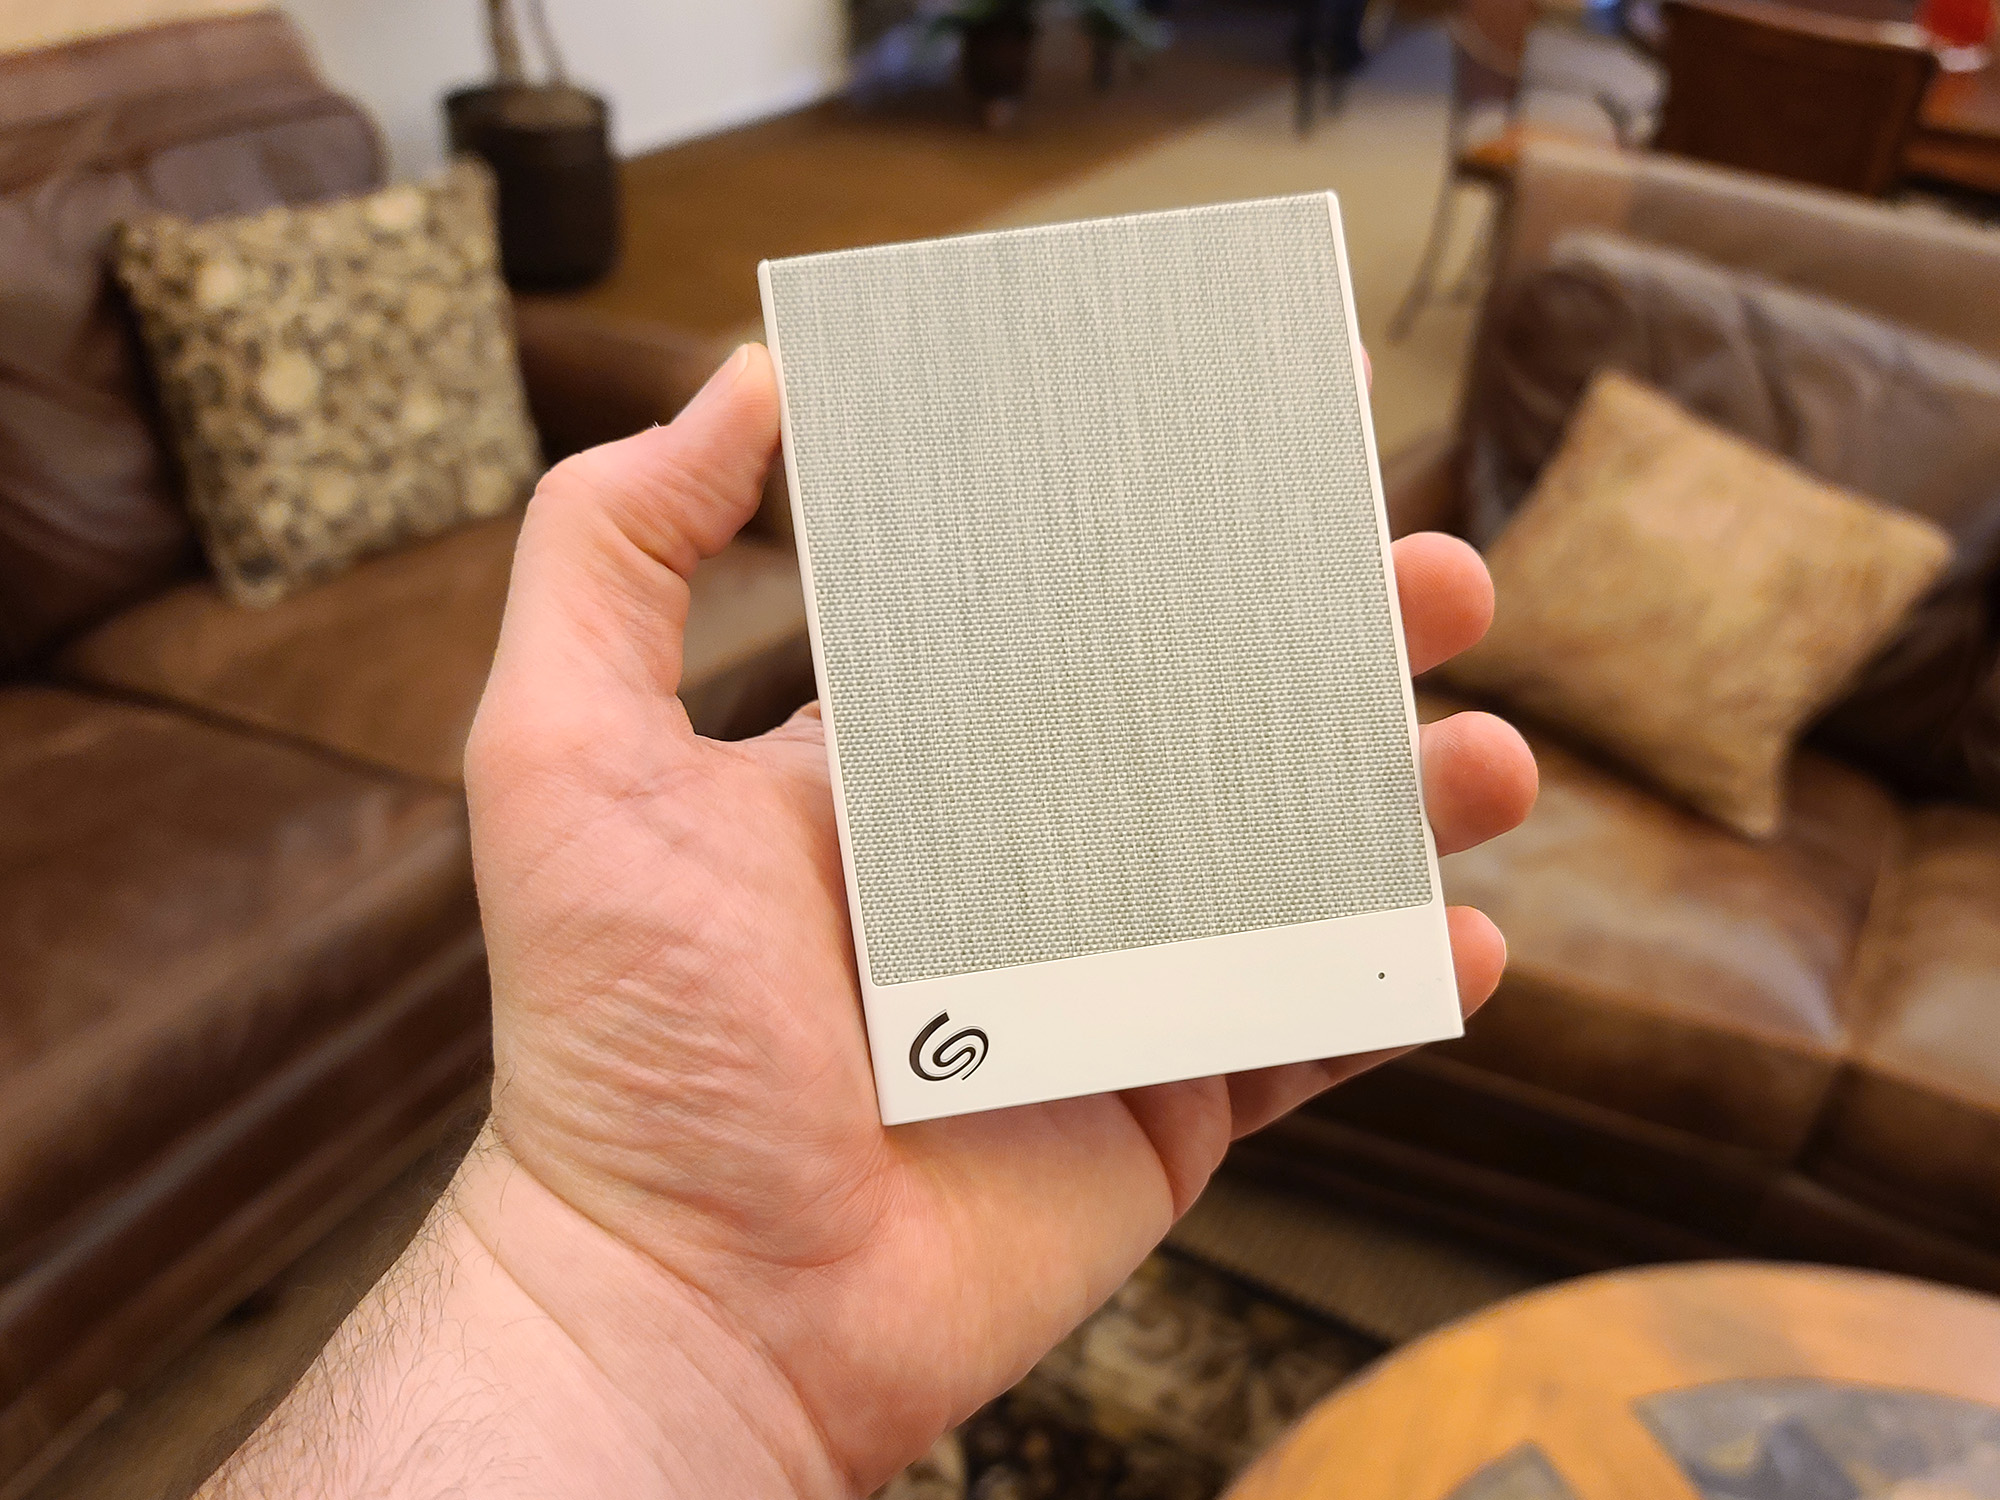 Best external hard drives: Seagate Backup Plus Ultra Touch (2TB)